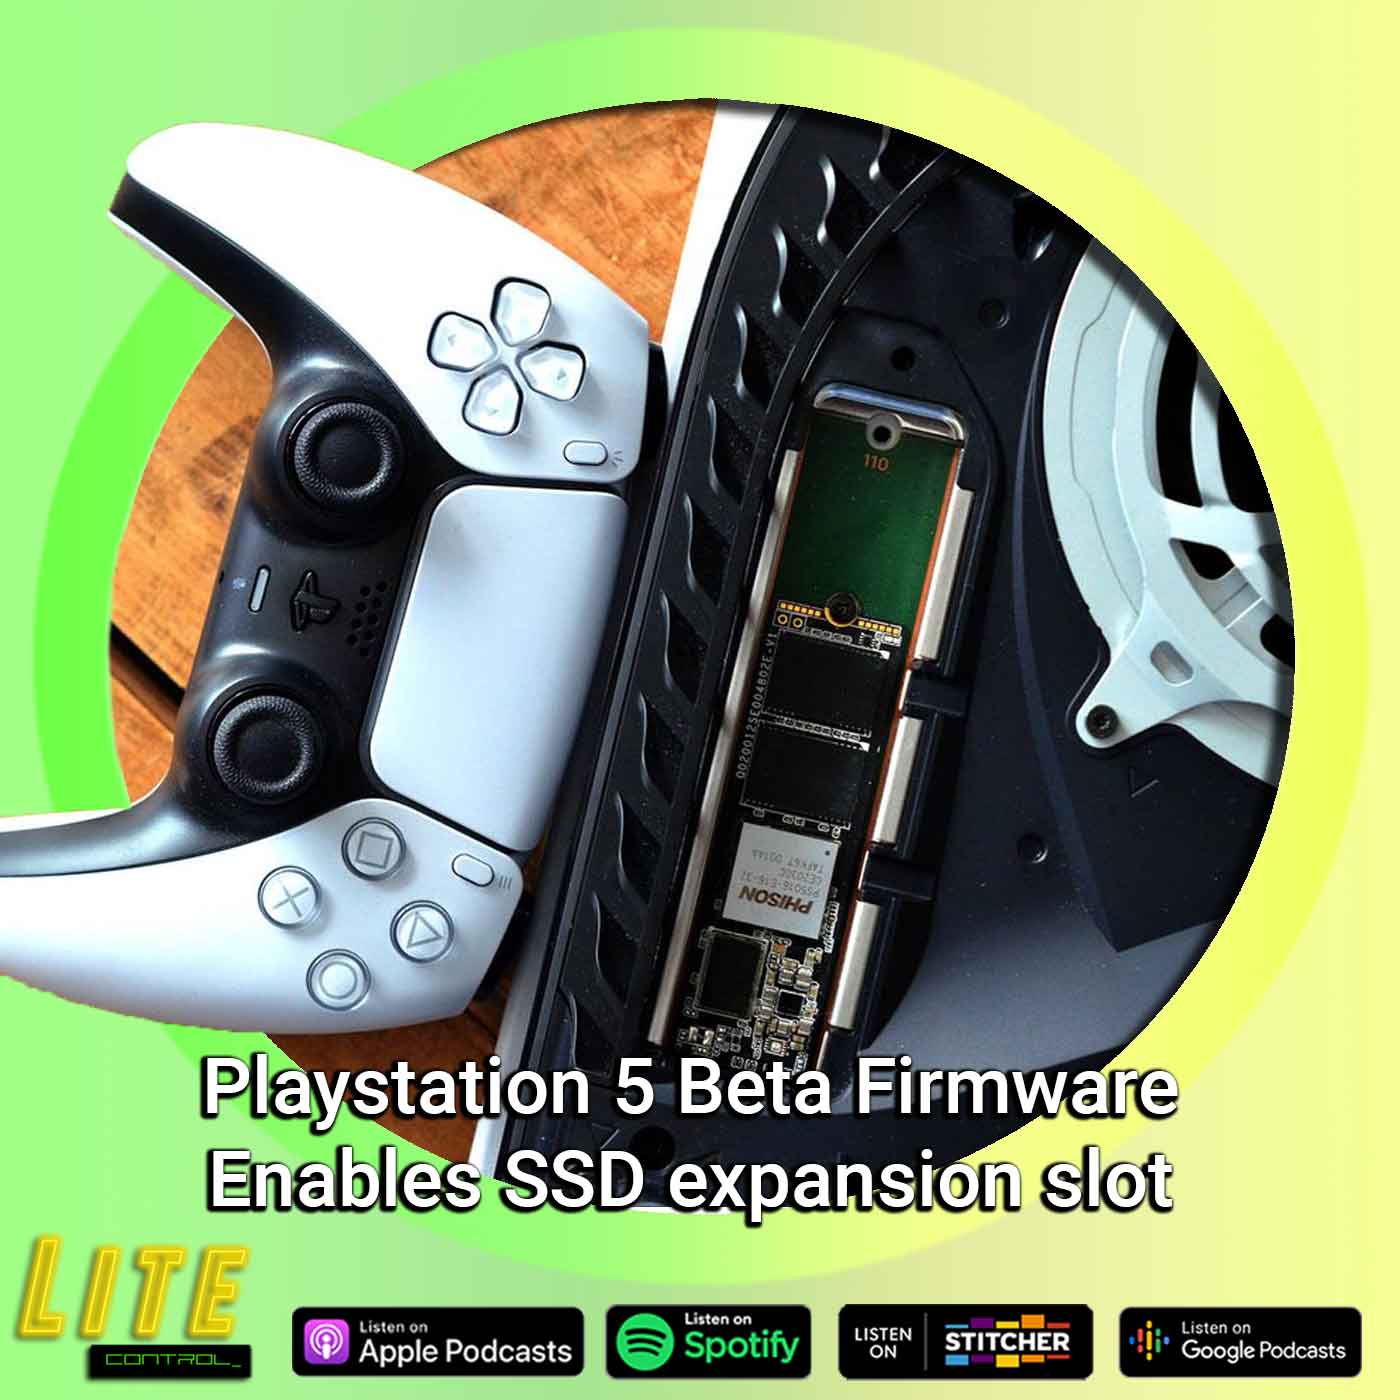 Lite Control 156 - PS5 Beta Firmware Features Enabling of Internal SSD Slot